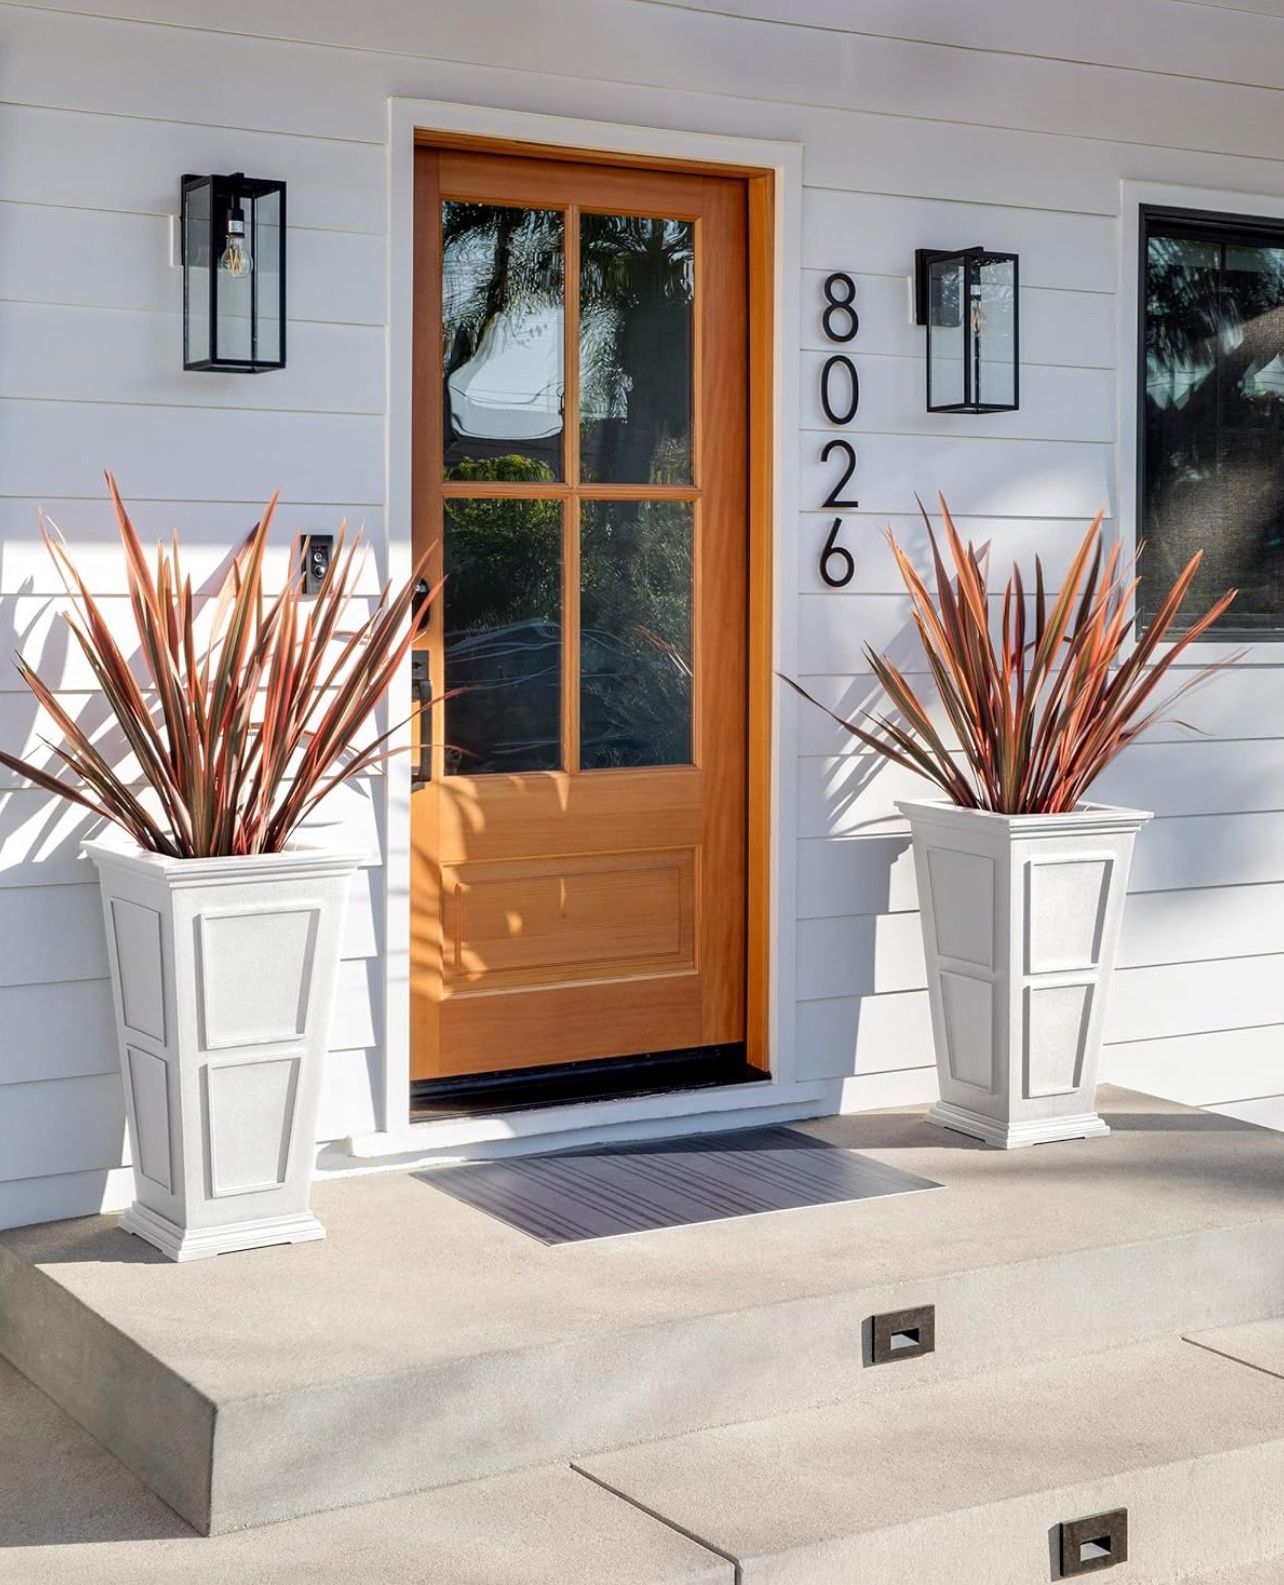 Large Outdoor Planter for Front Porch